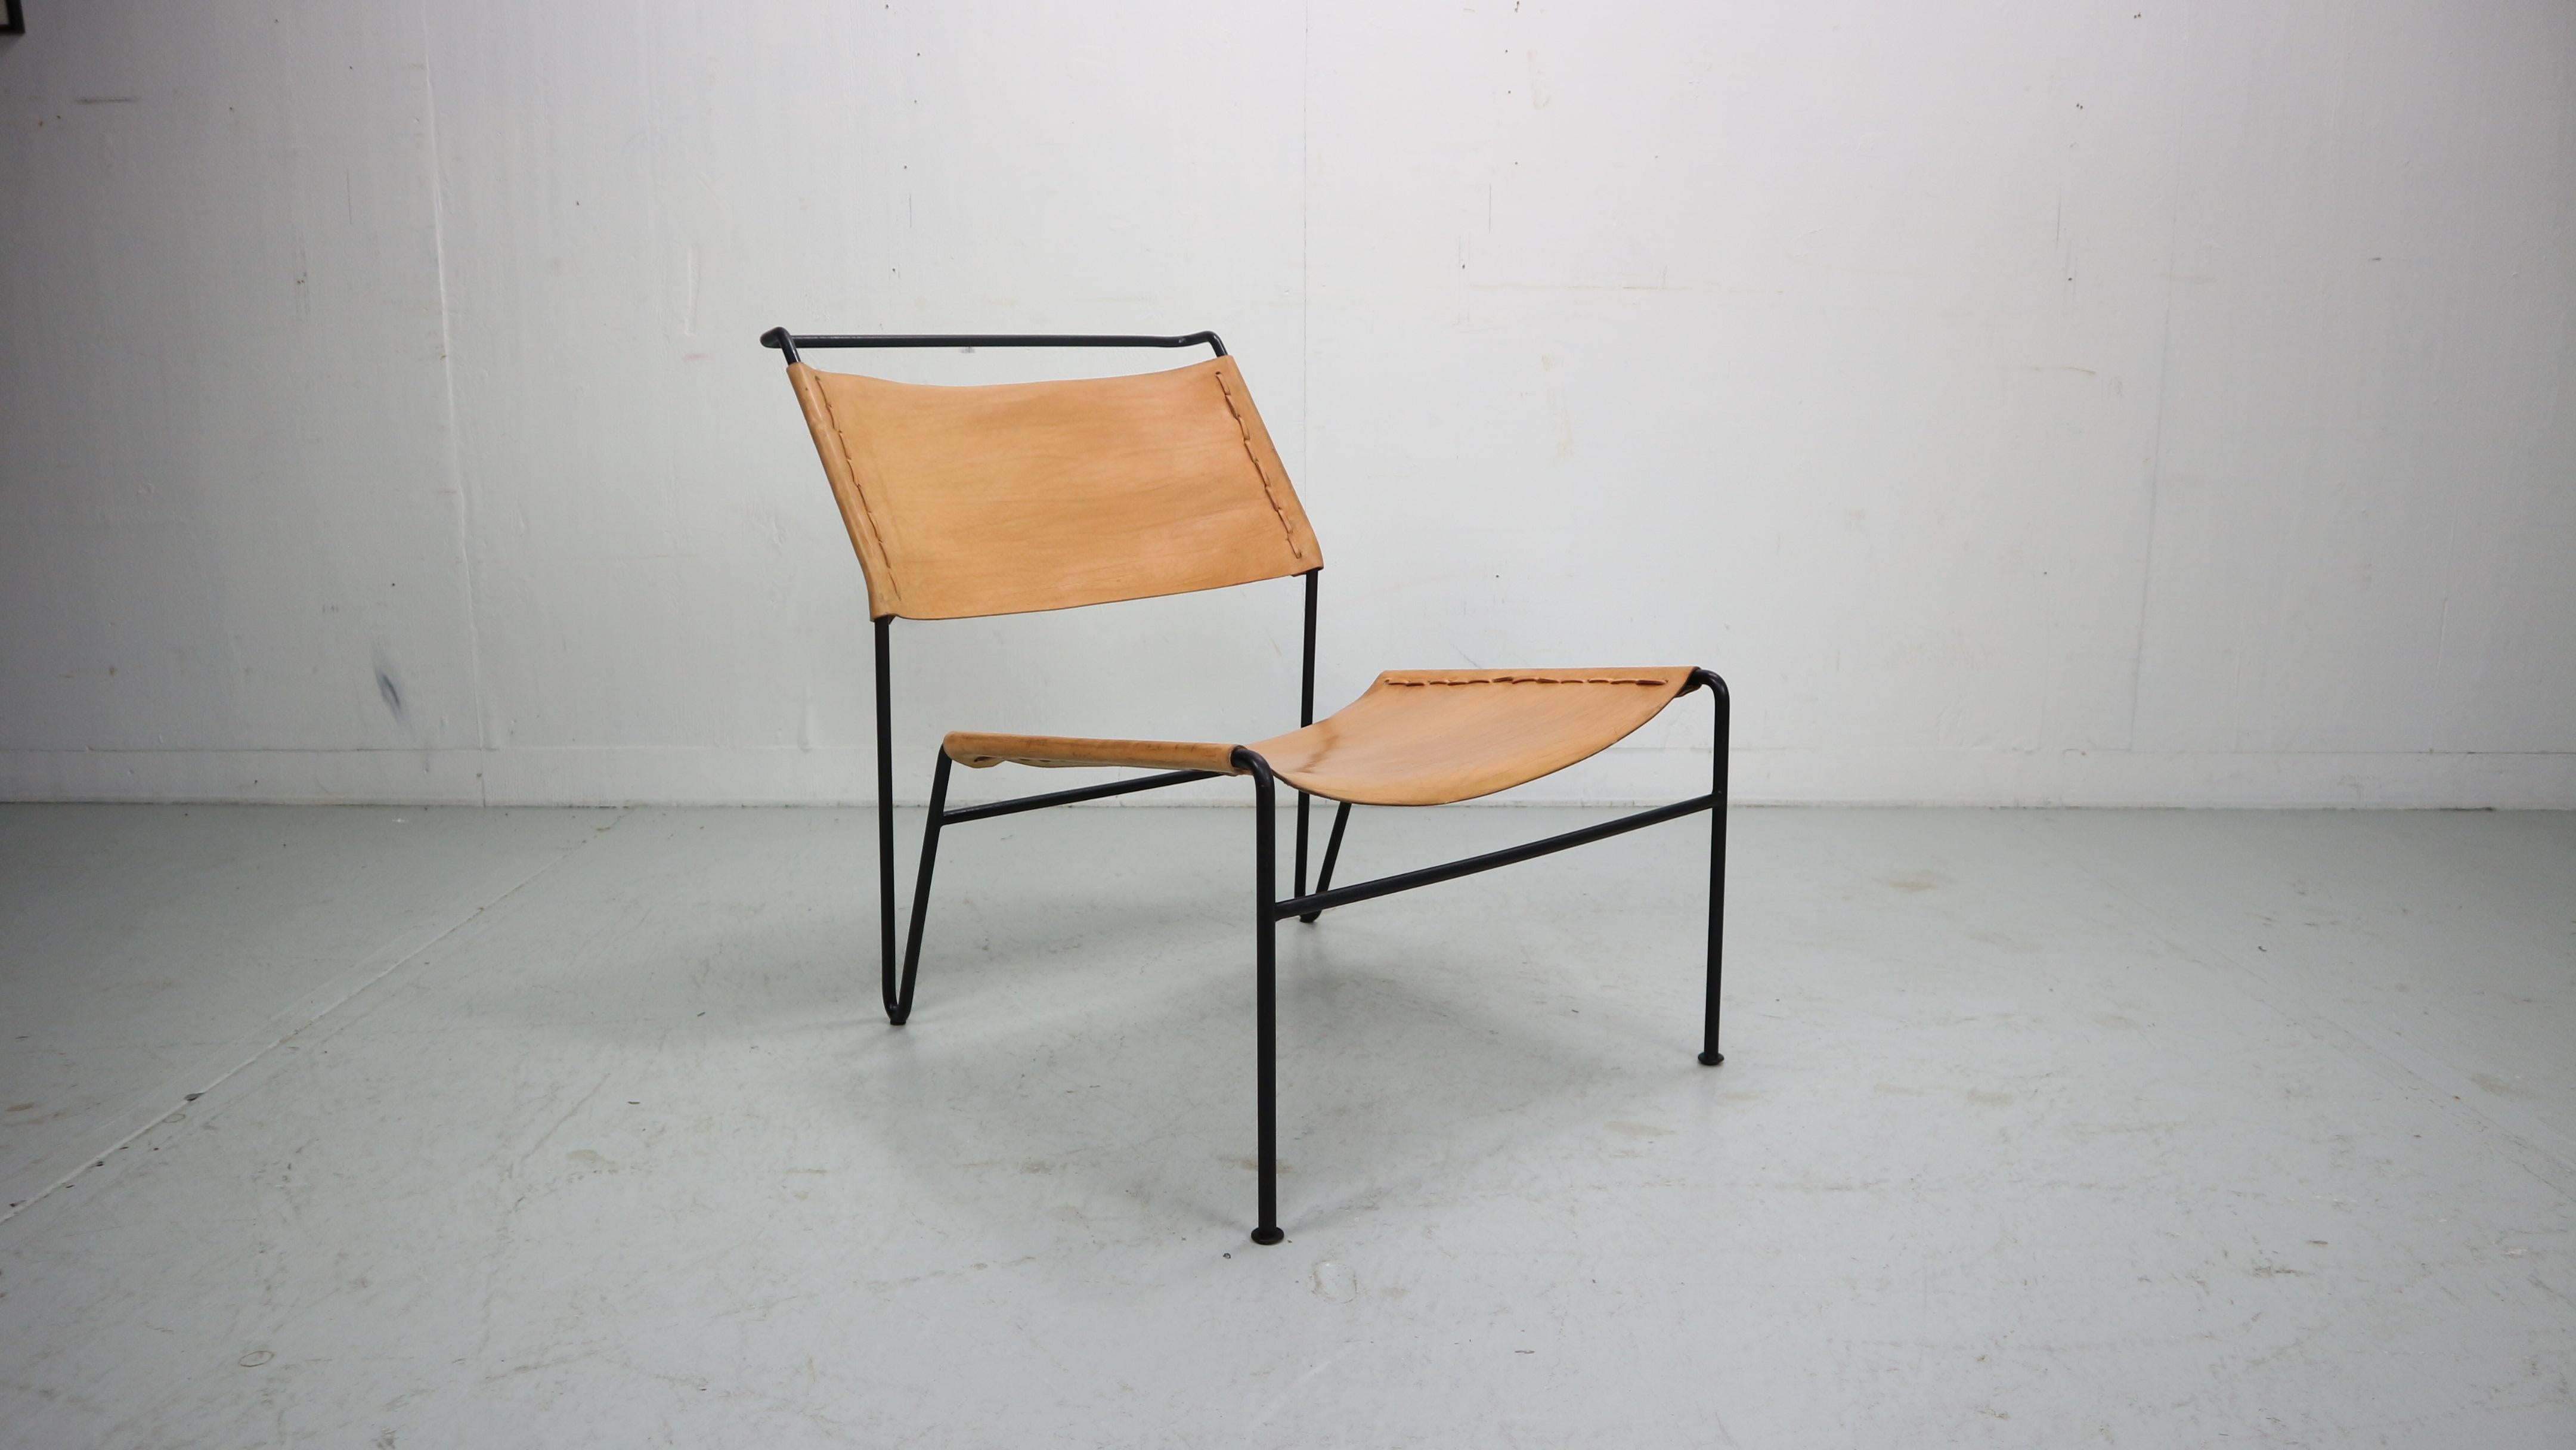 A fantastic  lounge chair designed by A. Dolleman, manufactured by Metz & Co in the Netherlands around 1950. The chair has a very appealing, minimalist design. The thin black lacquered metal bases is nicely bent into shape. The seat and backrest is